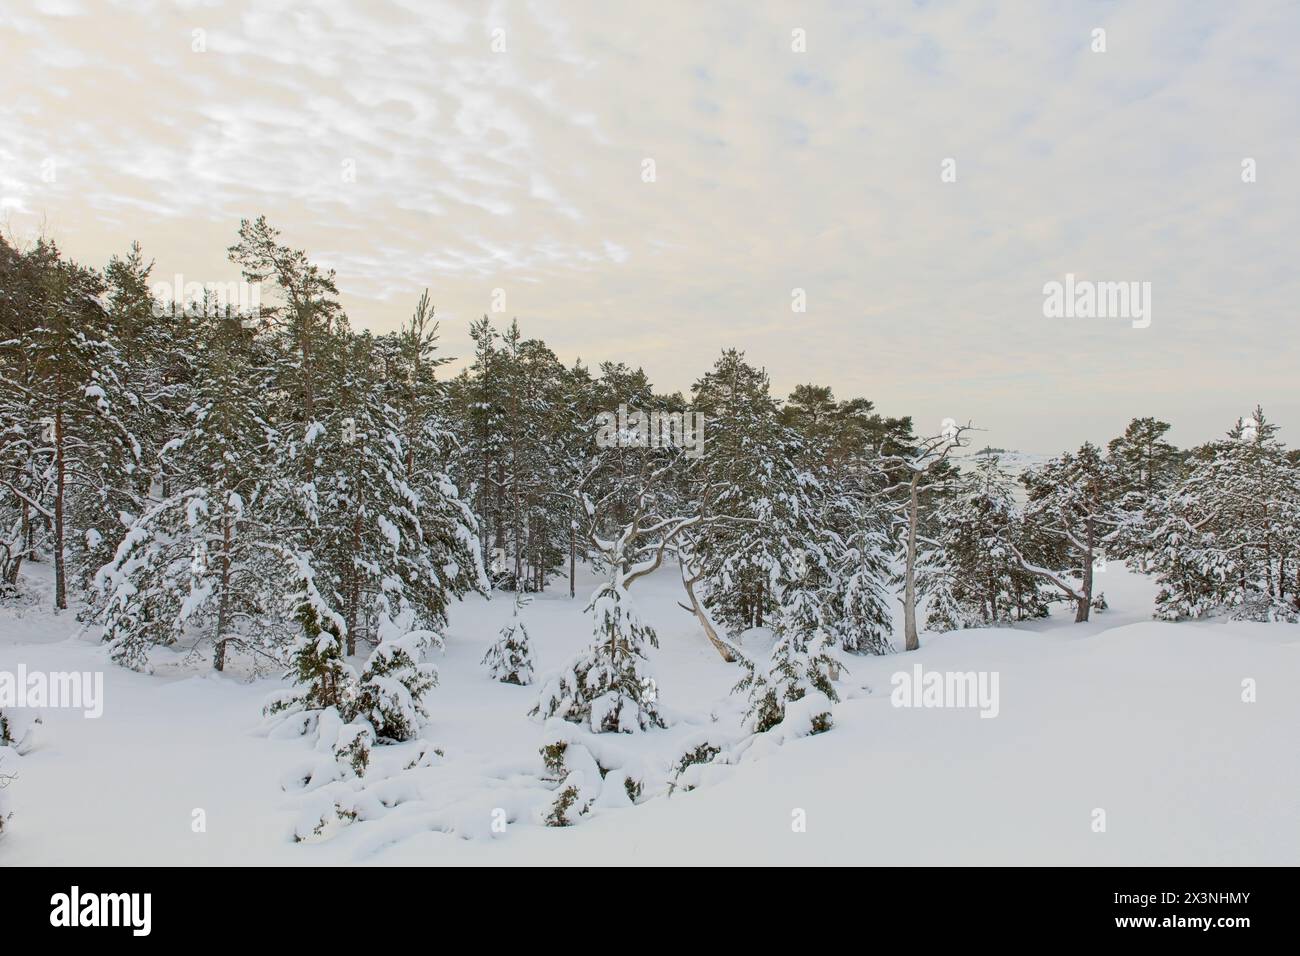 Winter landscape view of forest covered in snow with clouds in the sky, Porkkalanniemi, Kirkkonummi, Finland. Stock Photo